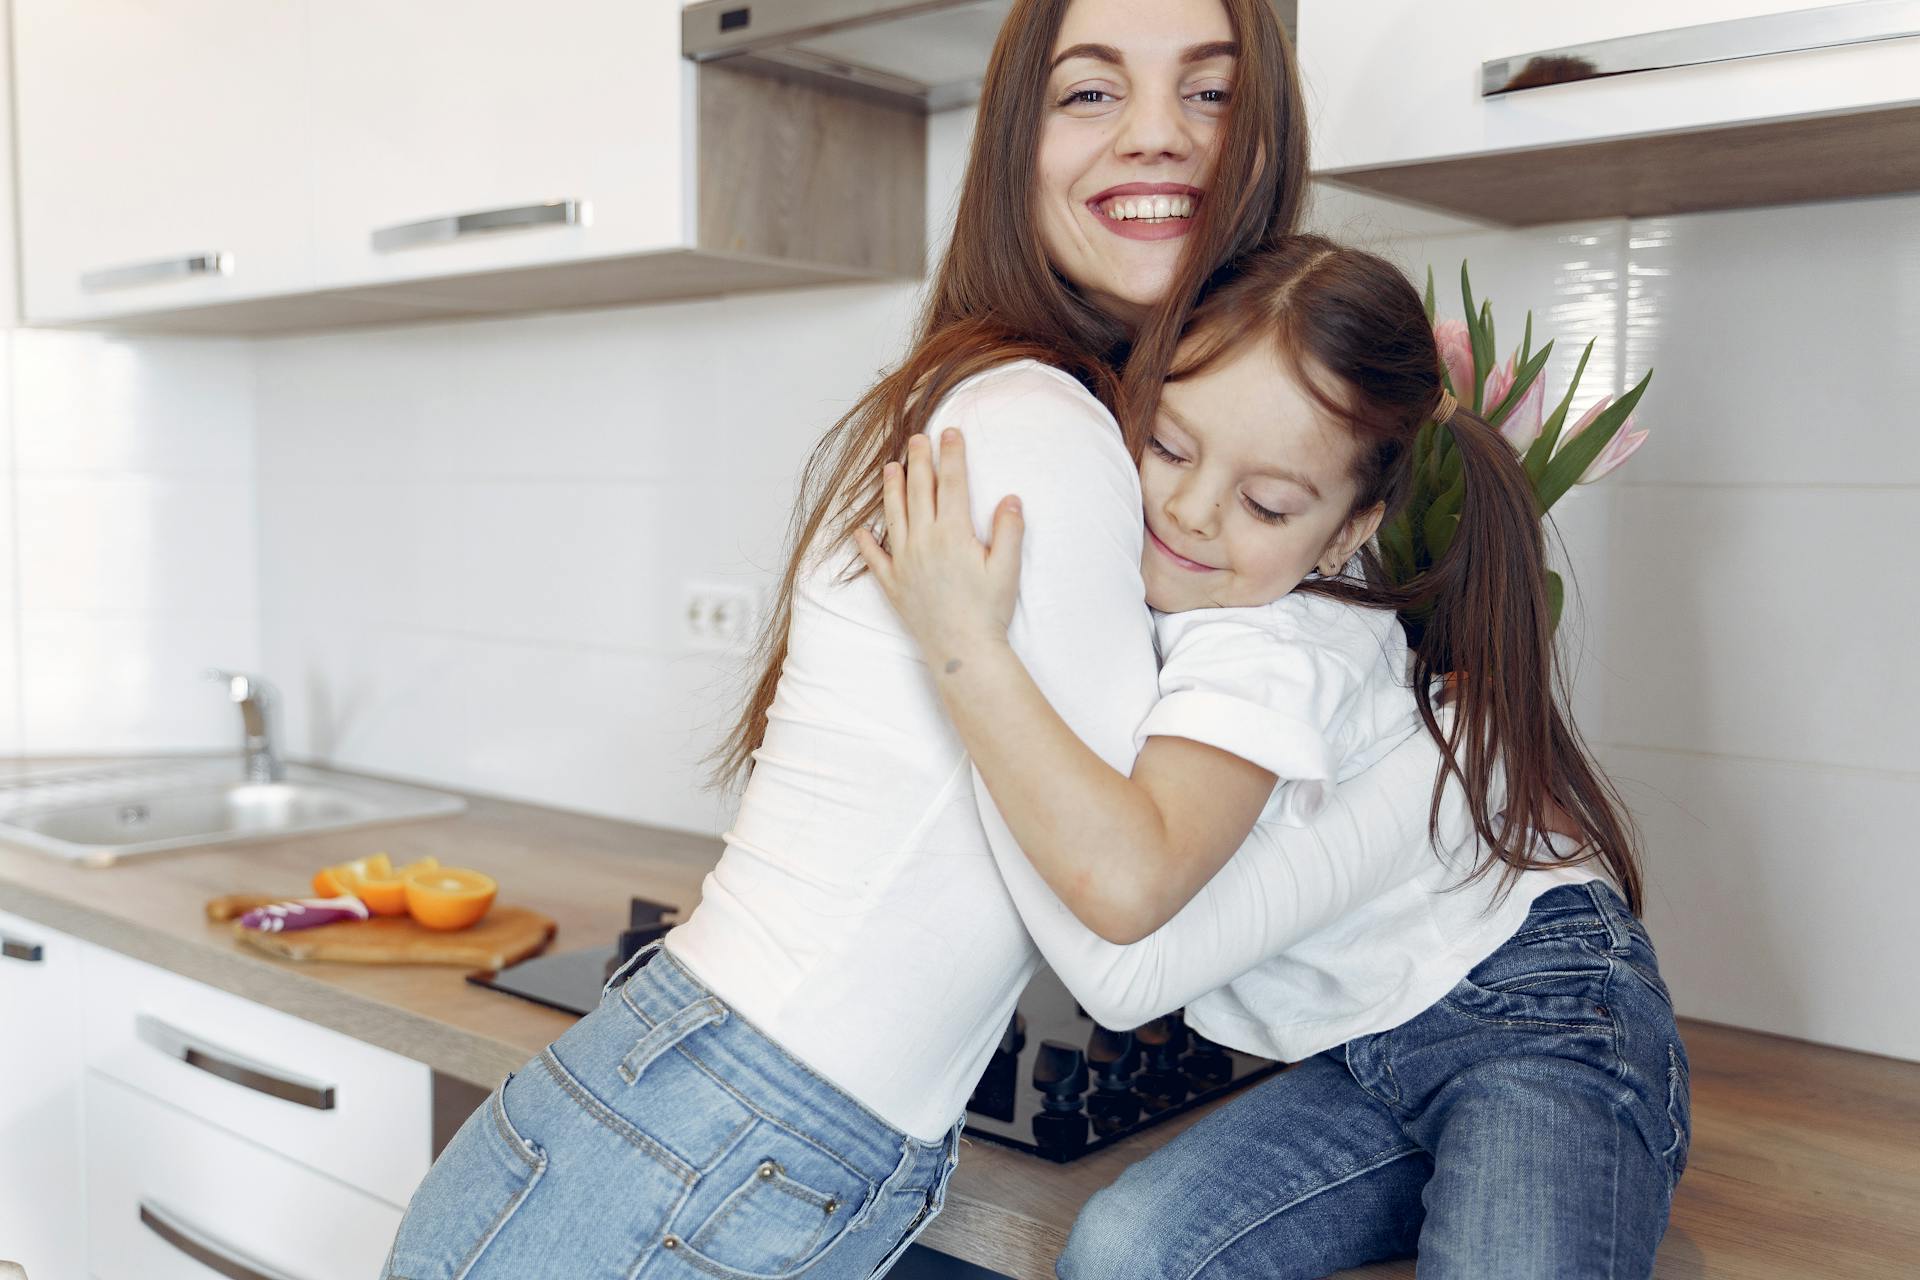 Mother and daughter hugging | Source: Pexels